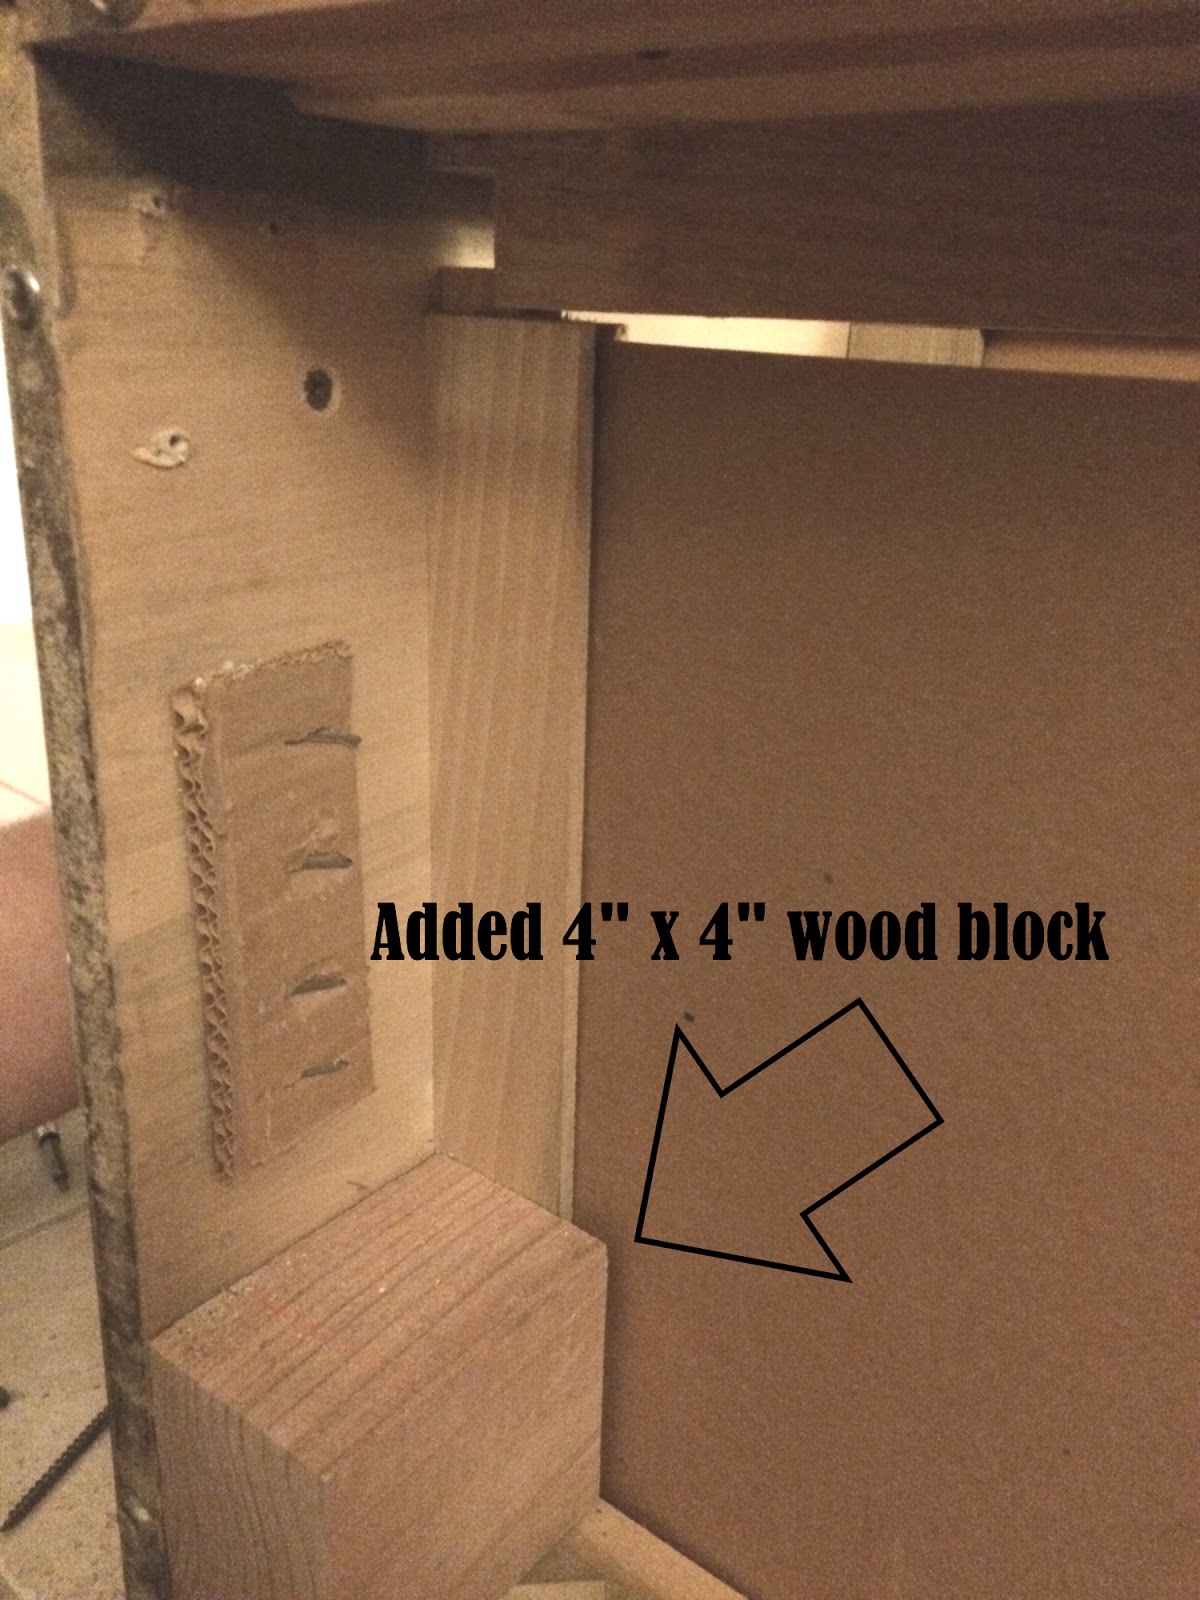 how to add legs to furniture, diy